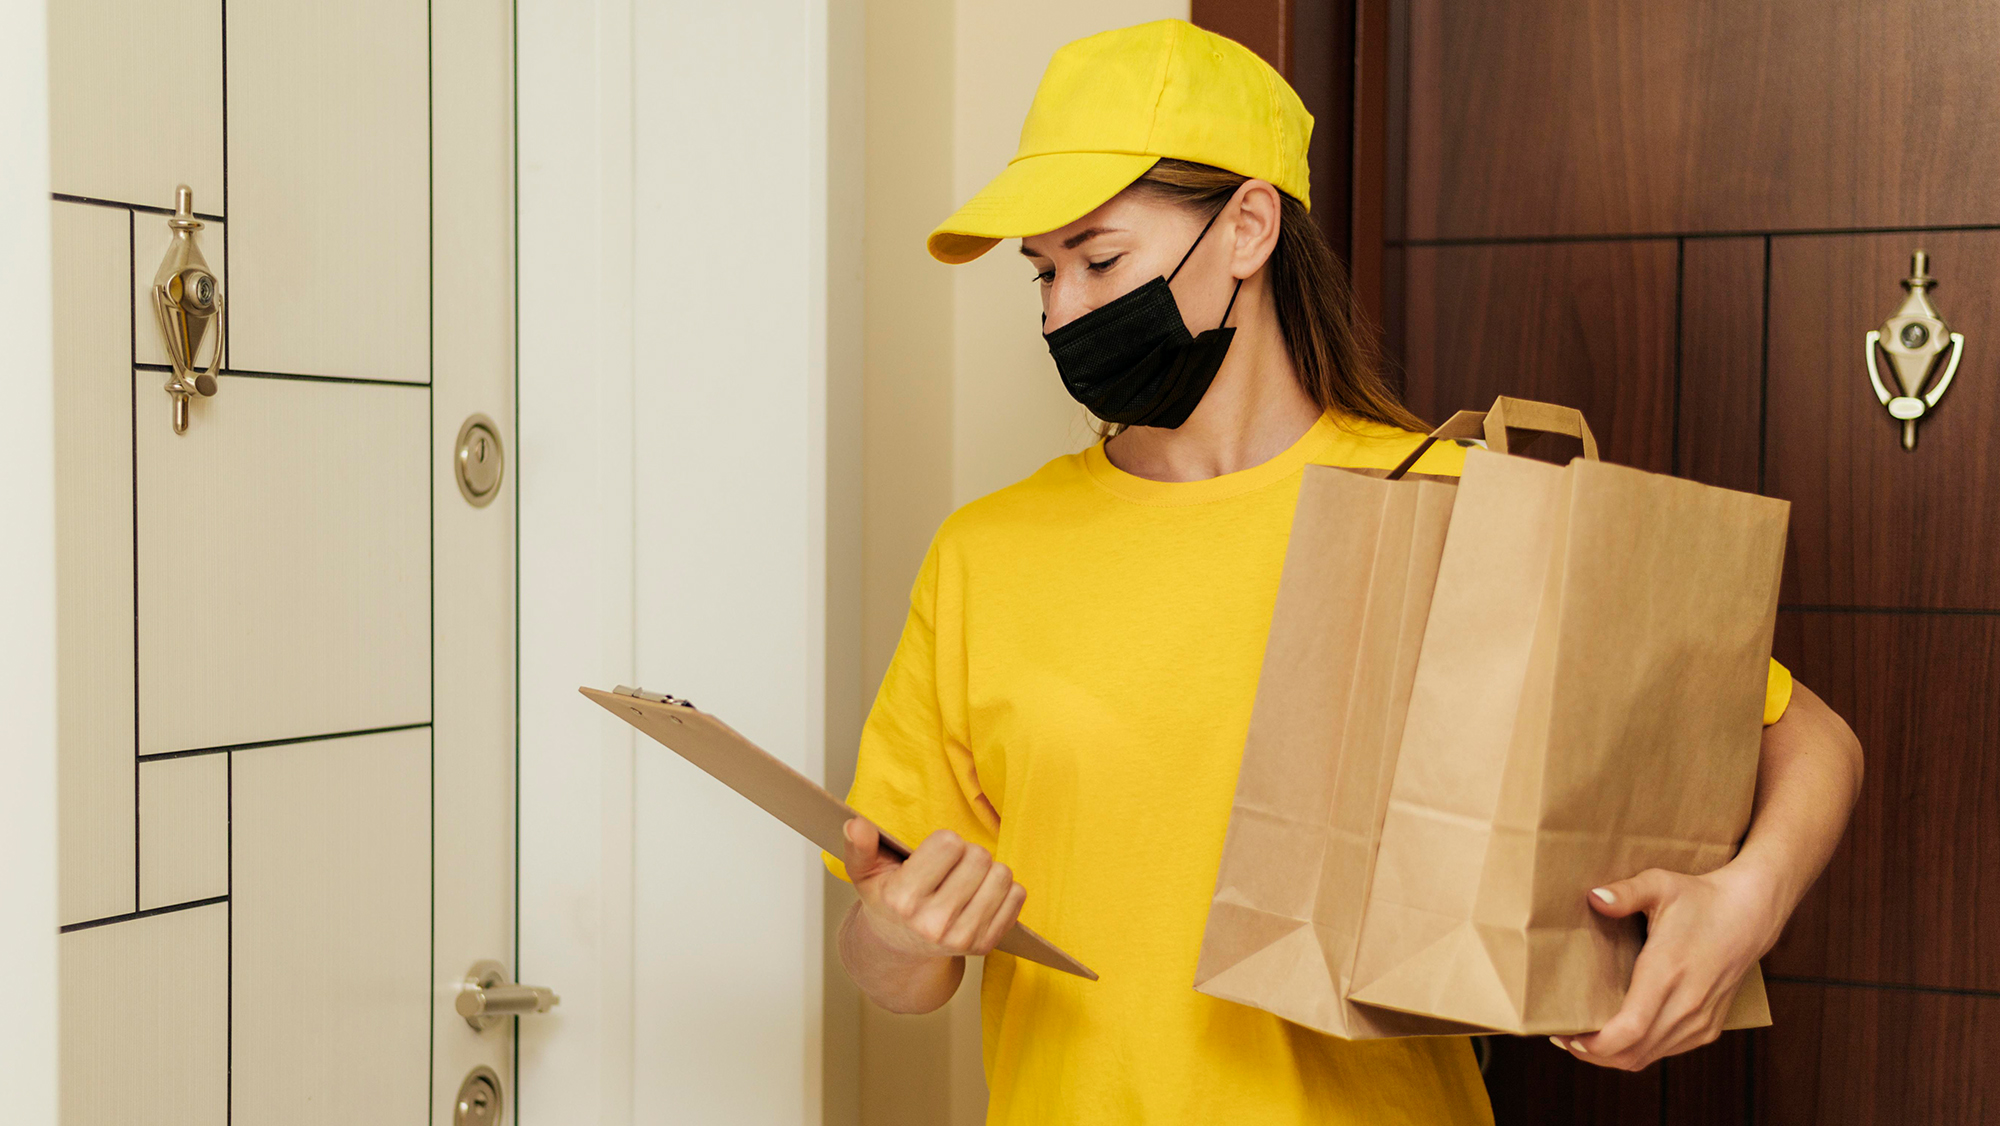 How to Choose a Prepared Meal Delivery Service as a Picky Eater